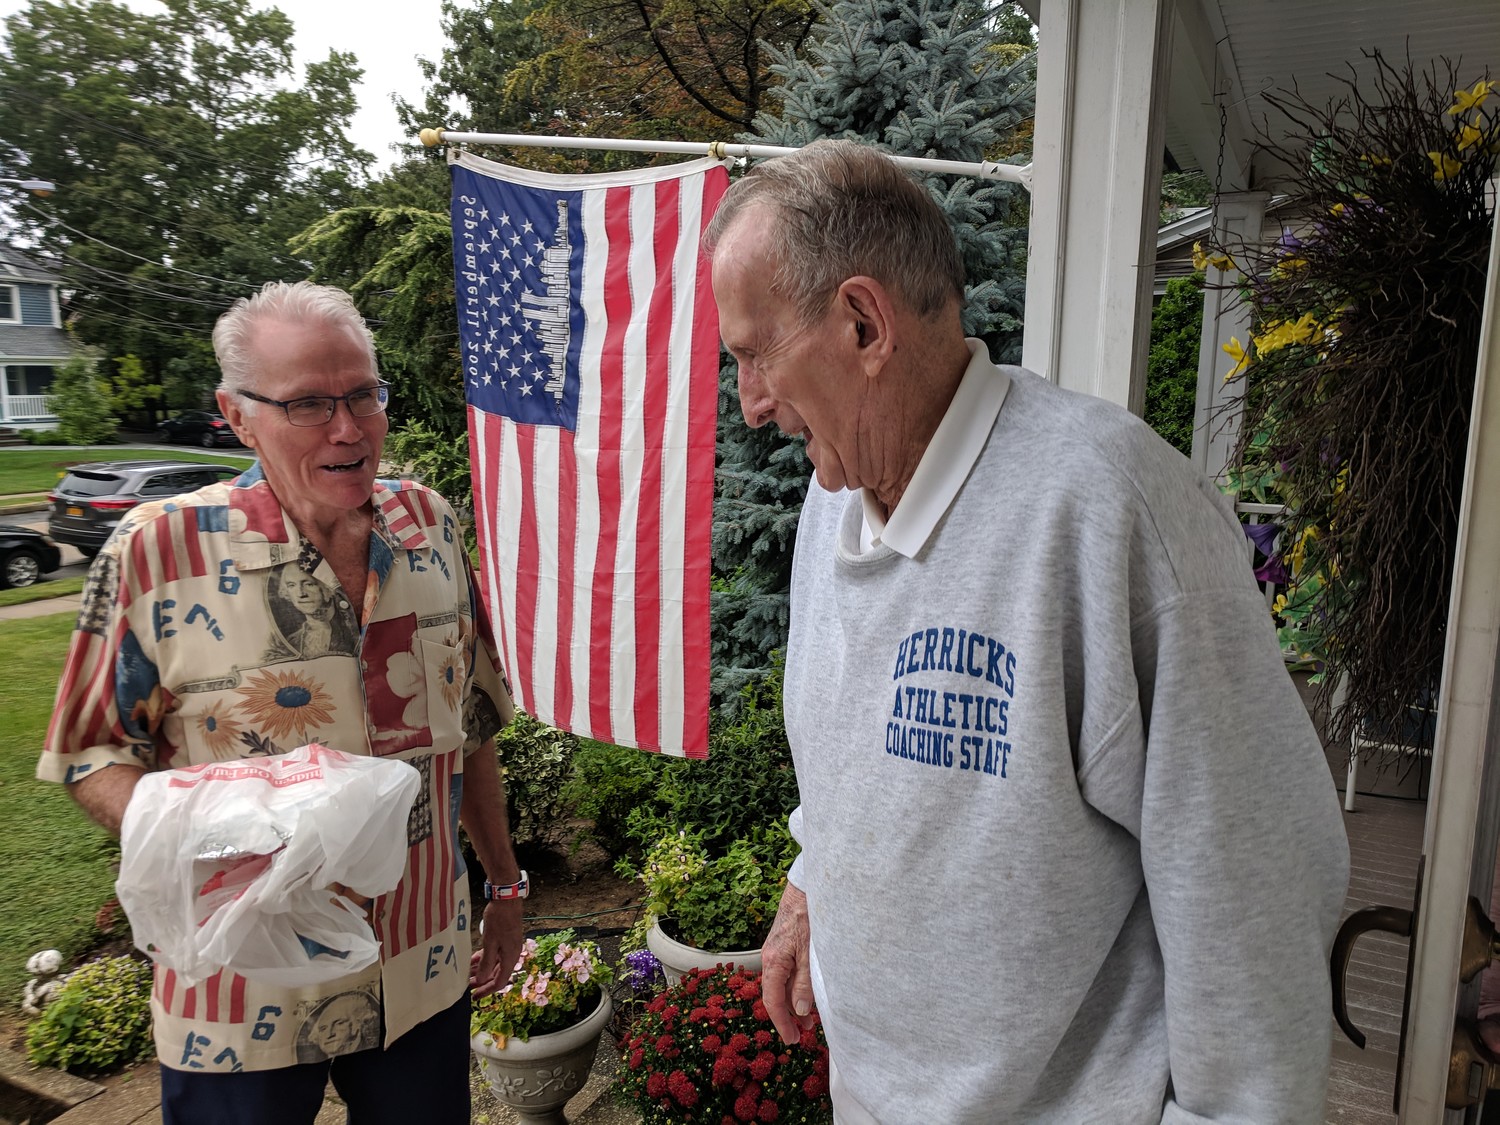 Joe O’Connor, left, who’s also known as the “pie man,” delivered an apple pie to Bernie O’Brien, who lost his son and son-in-law in the terrorist attacks on Sept. 11, 2001. O’Connor has been delivering pies to village residents who lost loved ones that day for the past 17 years.